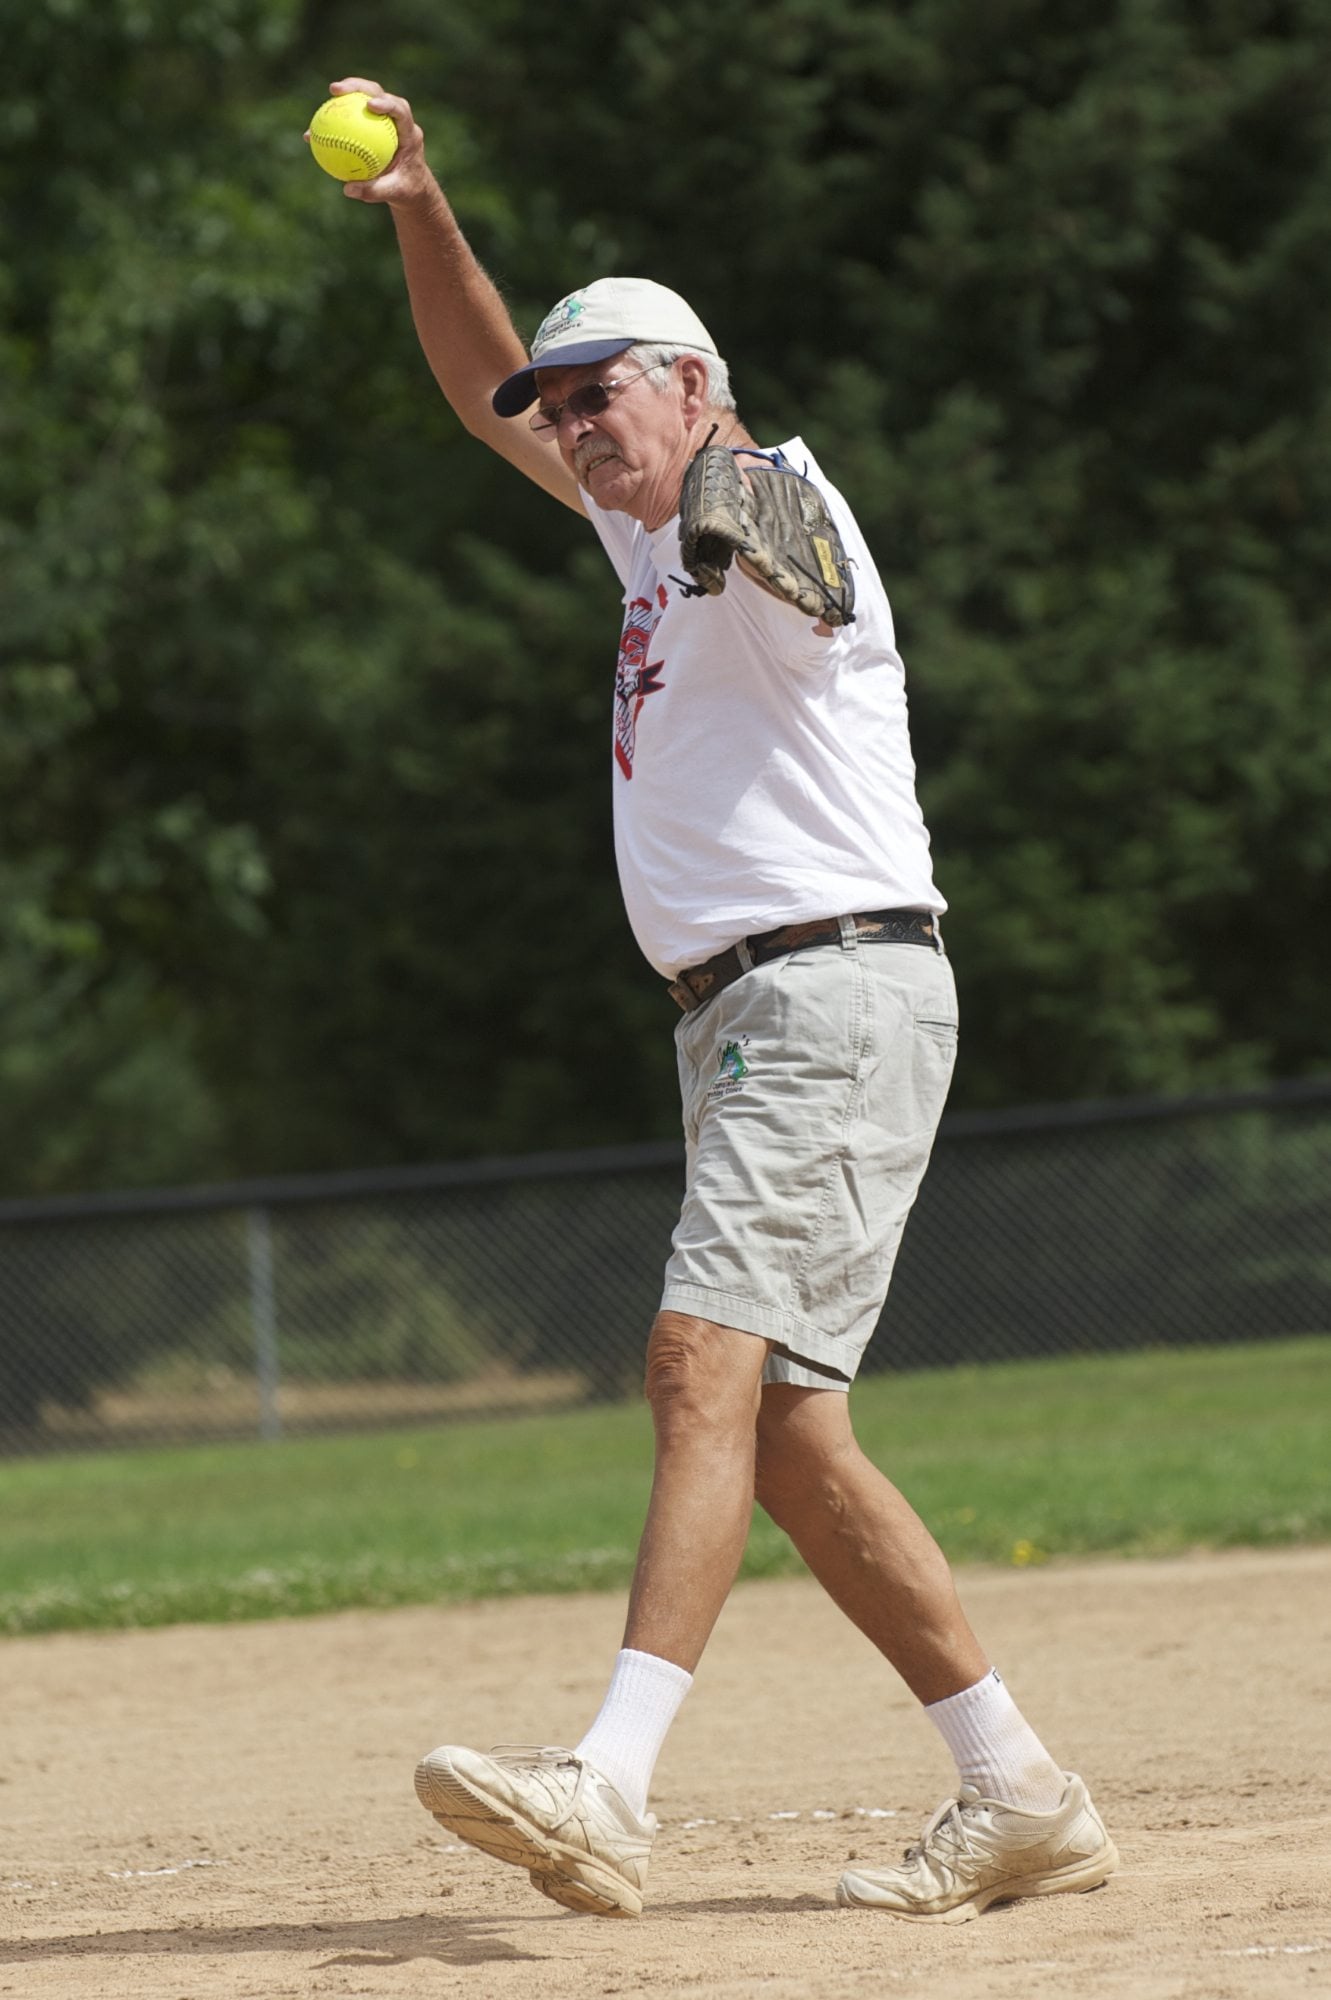 John Gay as the designated pitcher during VGSA's 50th Anniversary alumni softball game, Saturday, August 17, 2013.